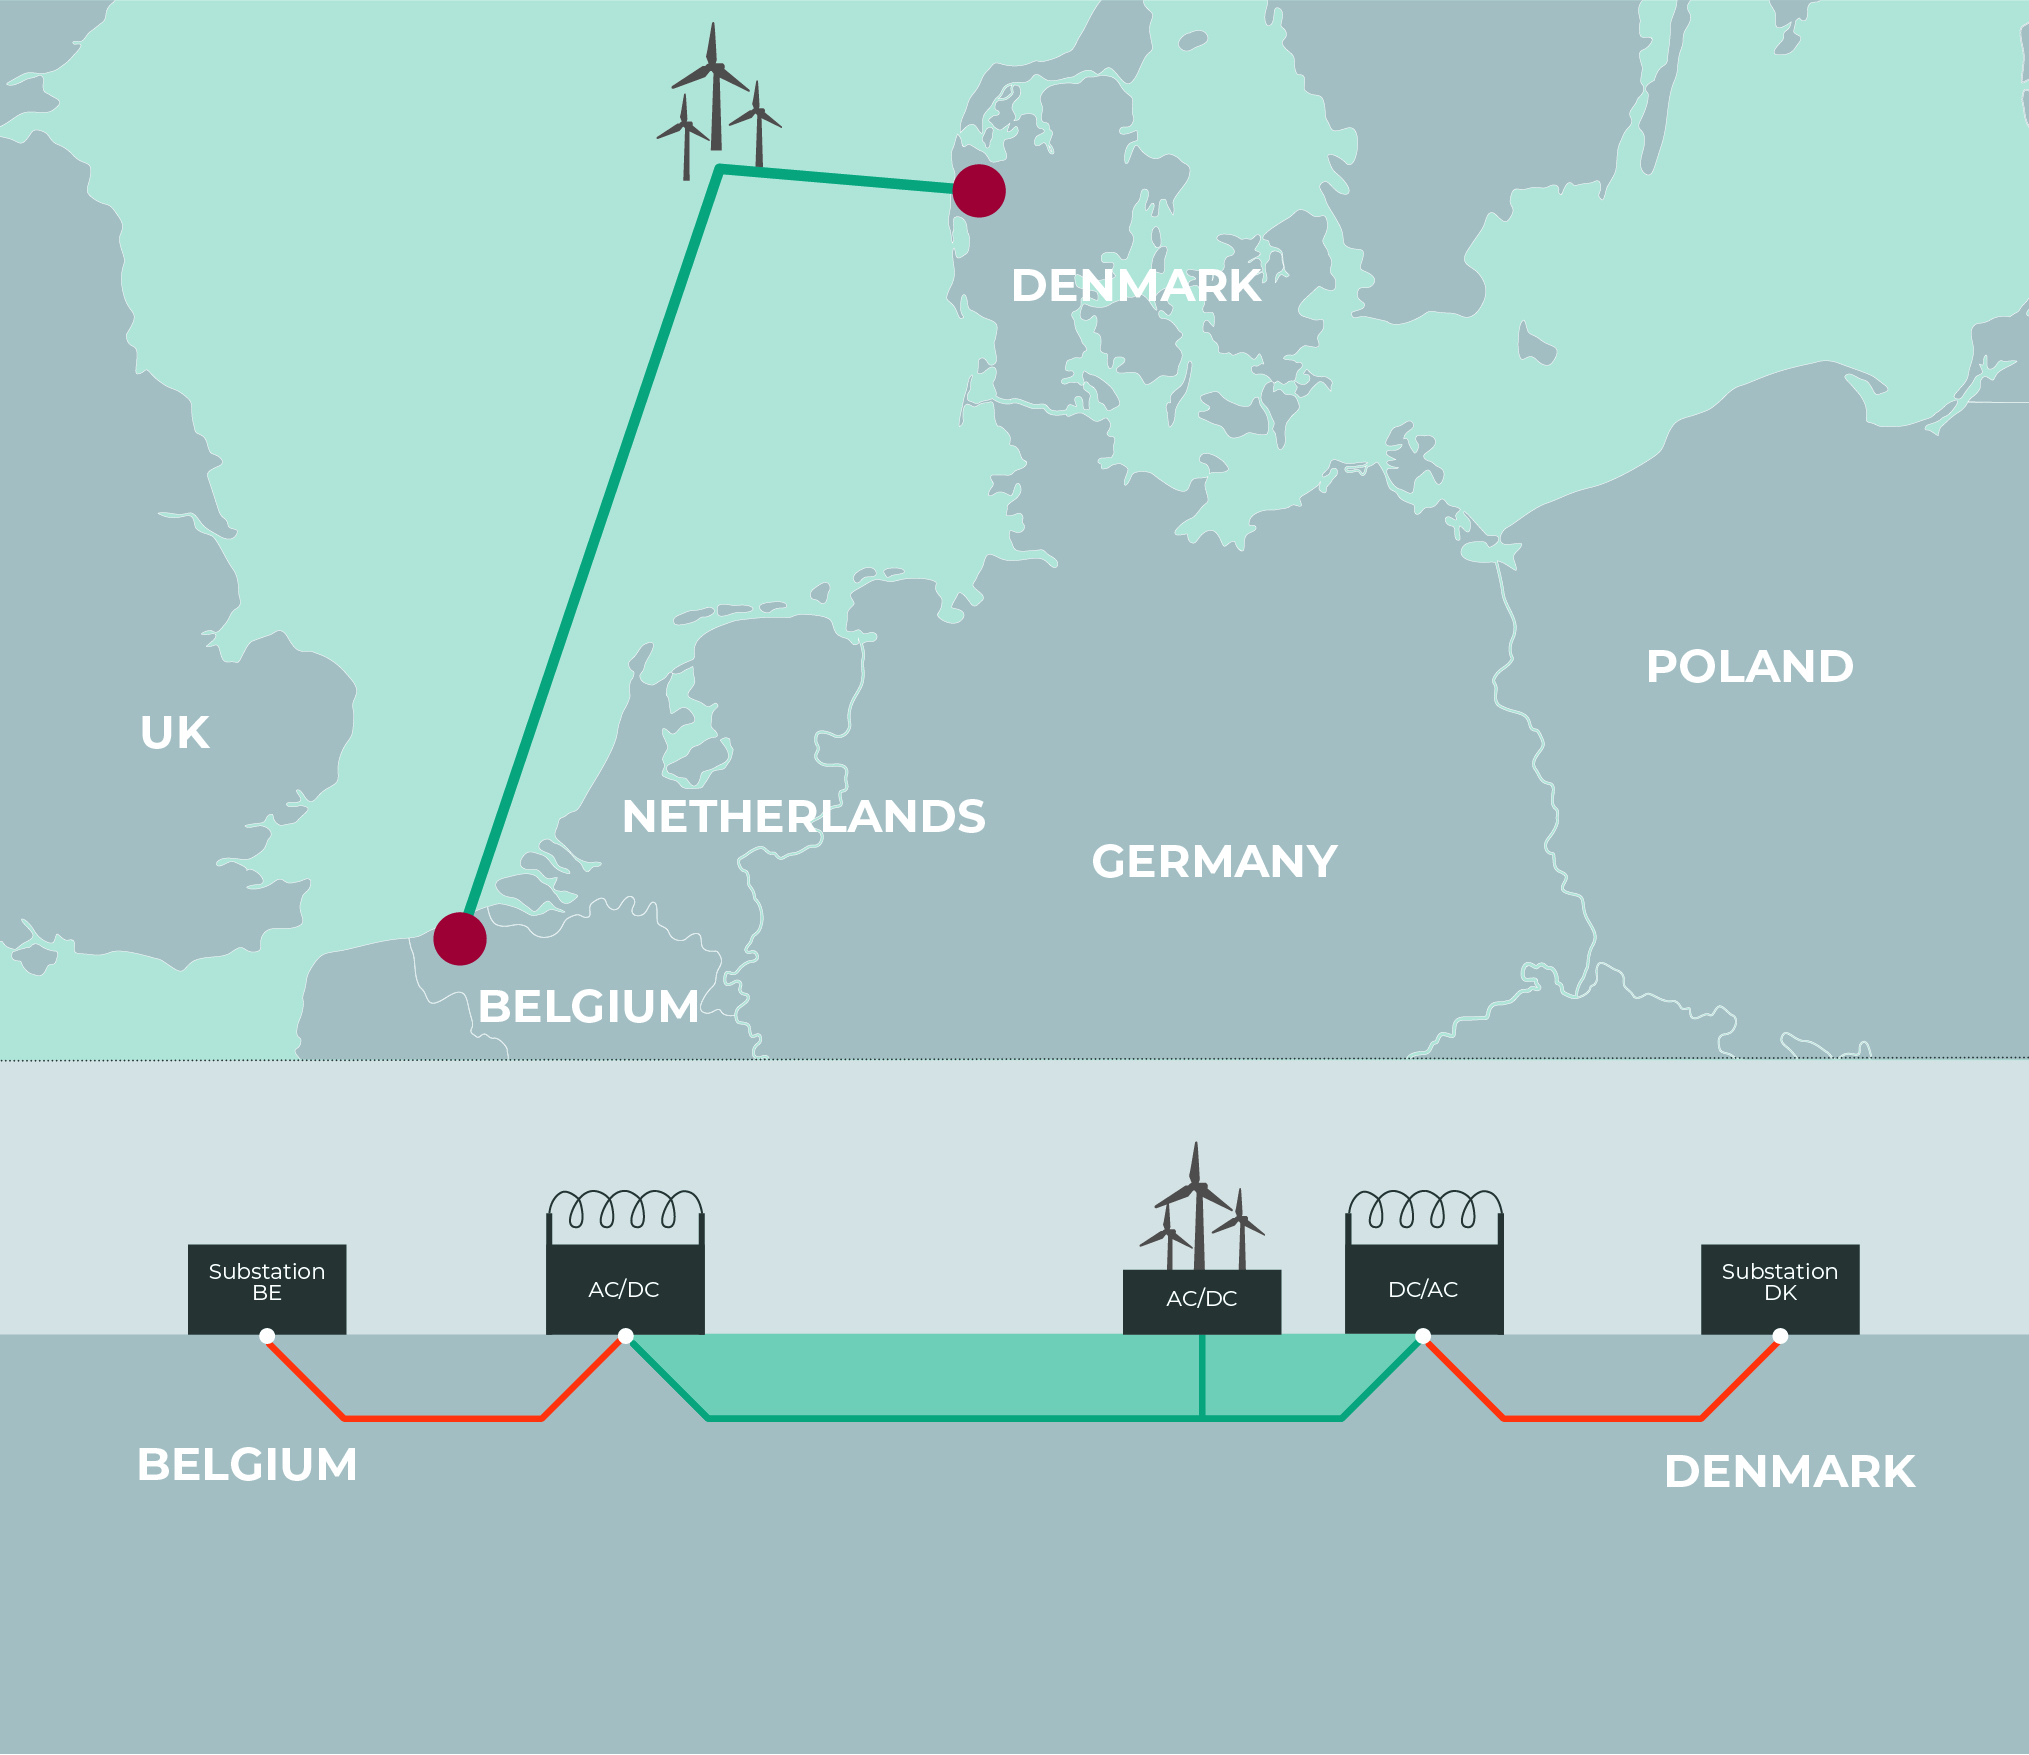 Belgium and Denmark subsea power link map